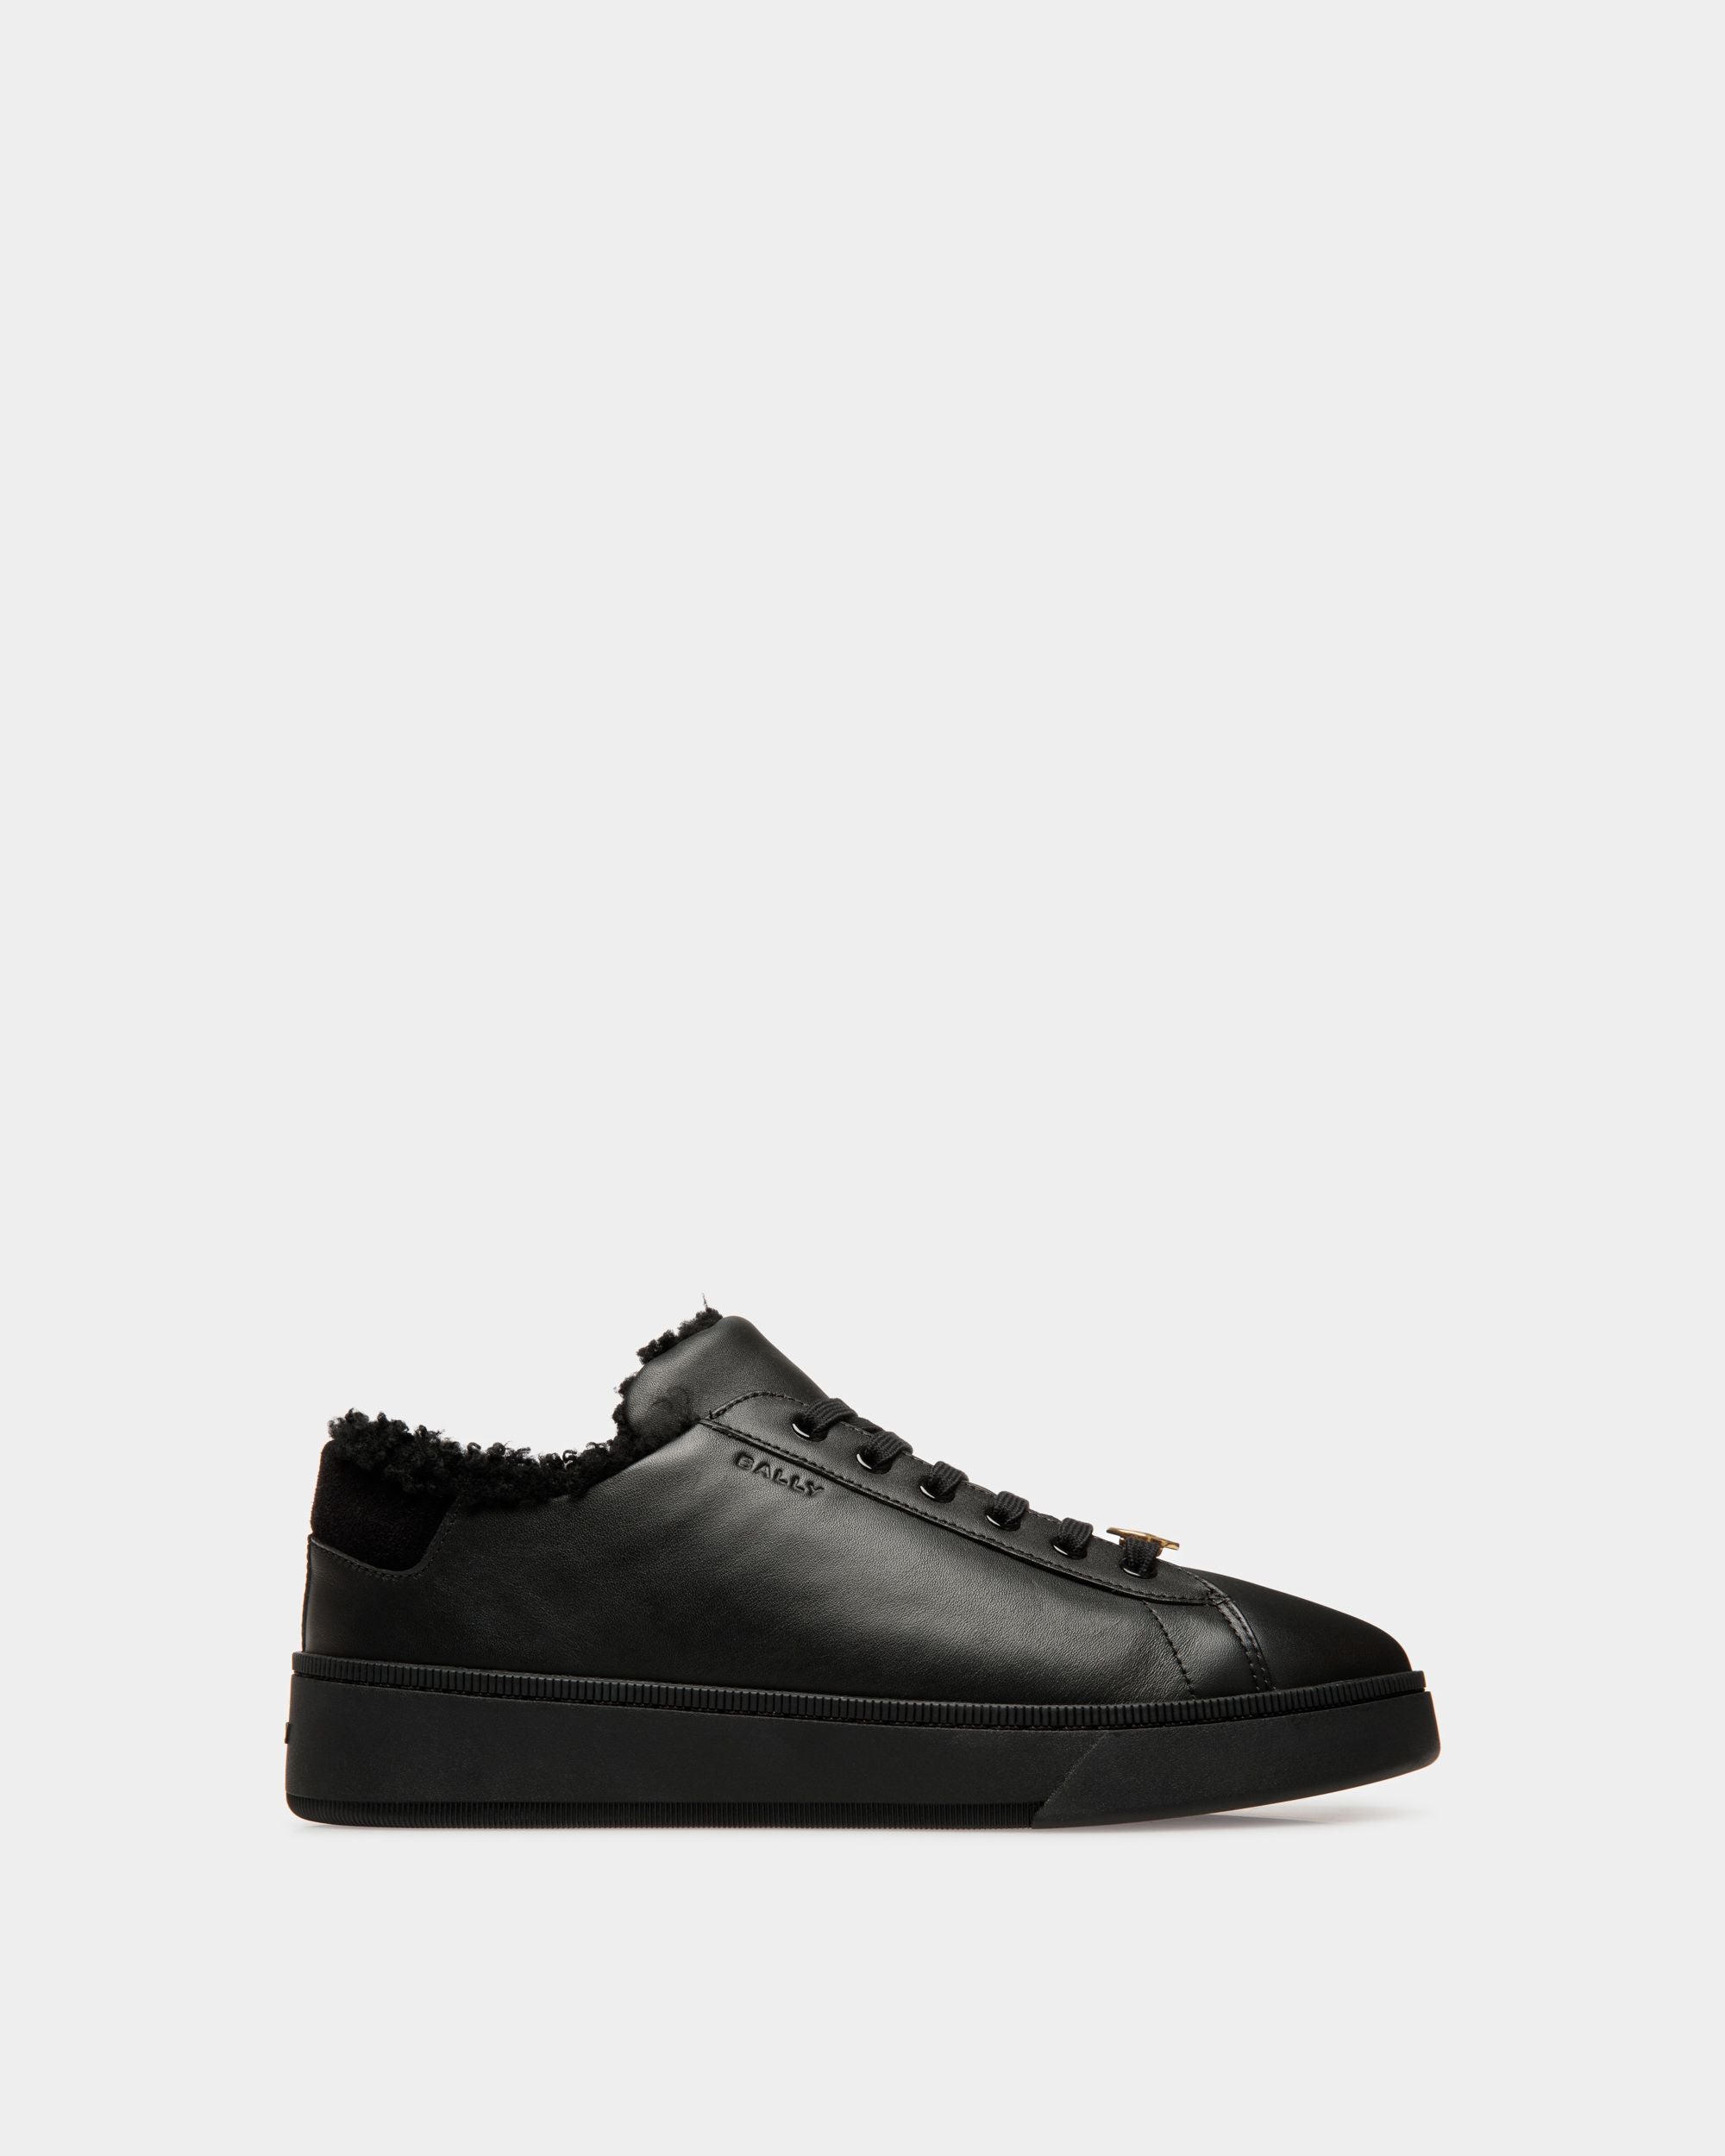 Ryver | Men's Sneakers | Black Leather | Bally | Still Life Side